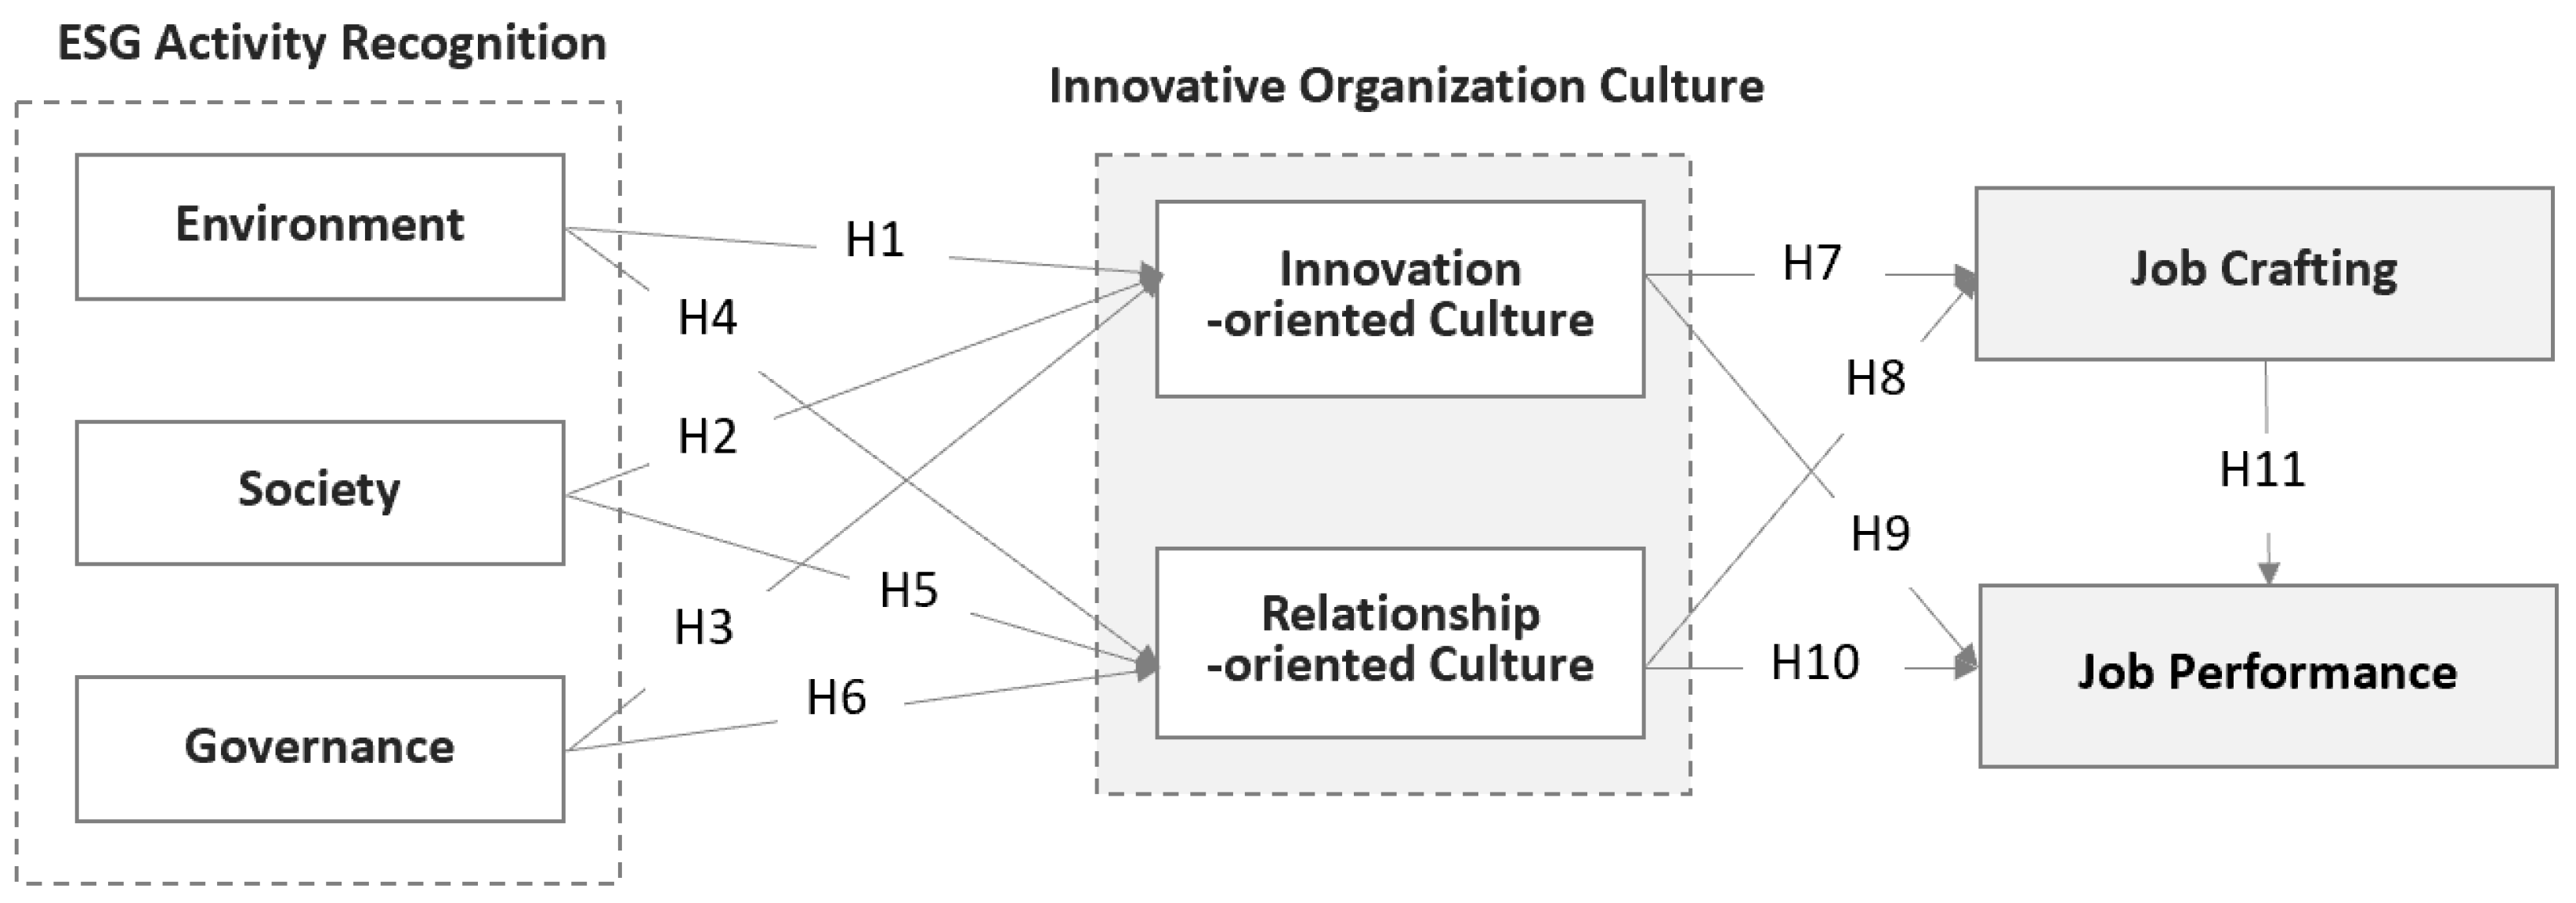 Administrative Sciences | Free Full-Text | Effects of ESG Activity  Recognition Factors on Innovative Organization Culture, Job Crafting, and  Job Performance